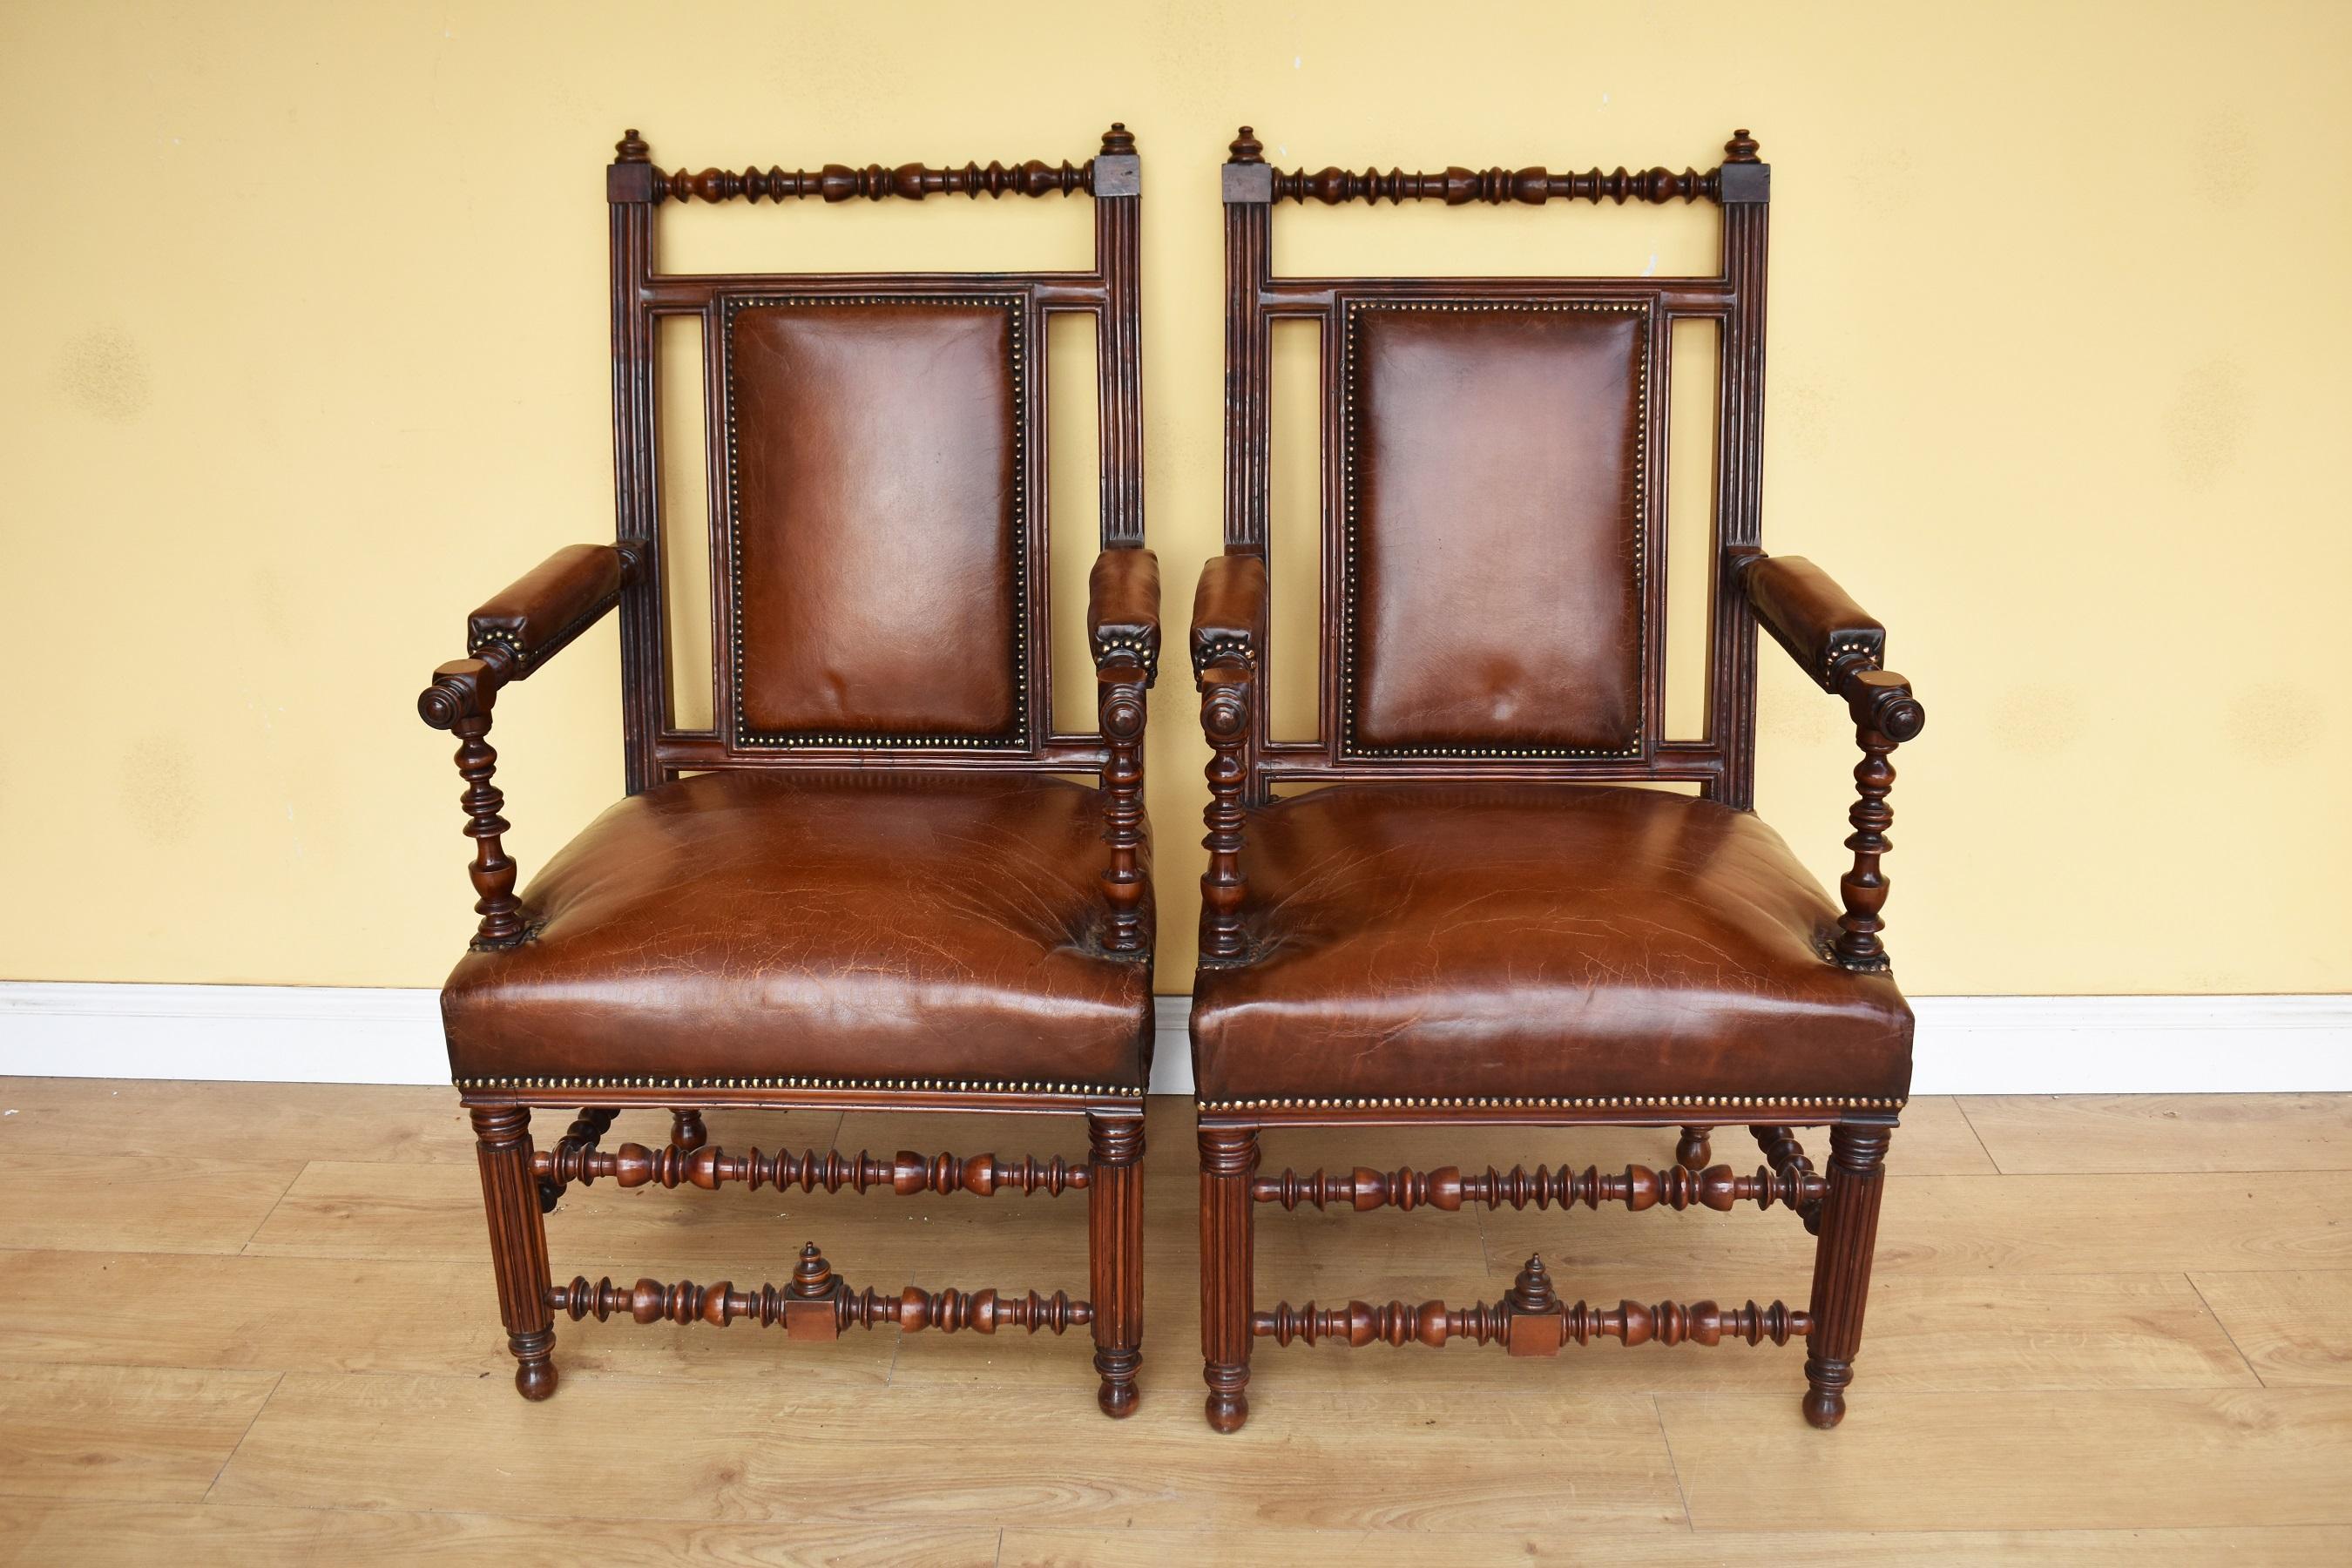 For sale is a good quality pair of 19th century Victorian reformed Gothic walnut and leather upholstered armchairs. Both armchairs have ornately turned frames and stretchers, and have been made in the manner of Bruce Talbert. The chairs are